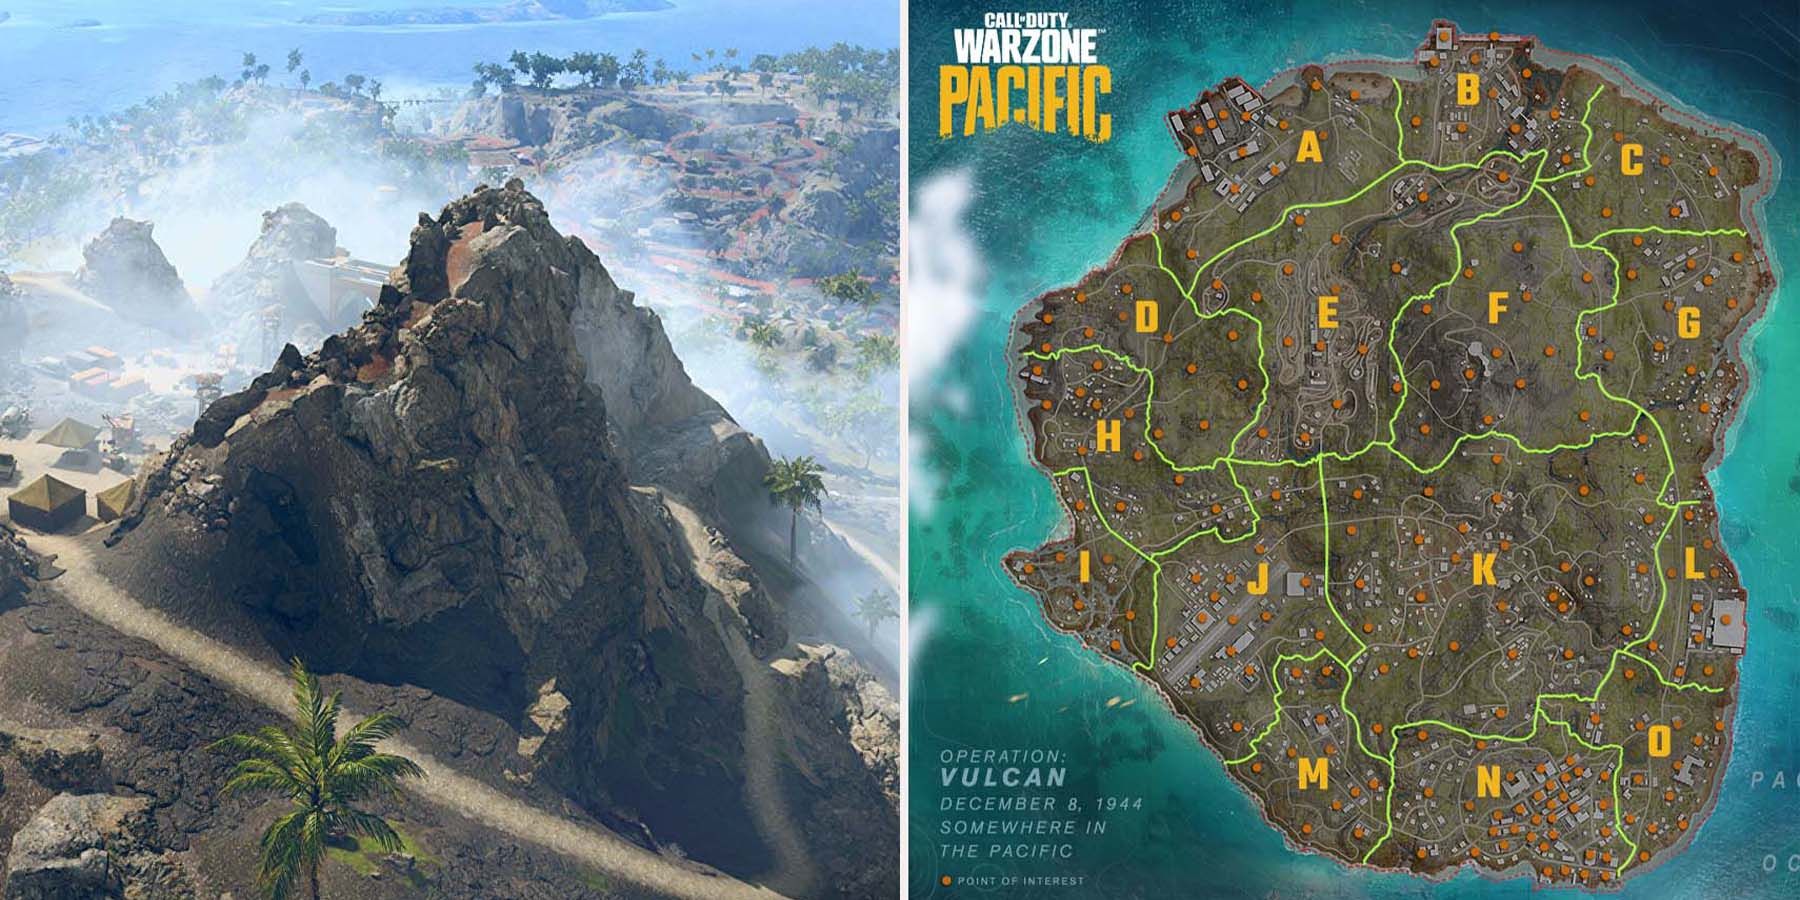 Call Of Duty Warzone 5 Beginner Tips For The Caldera Map featured image